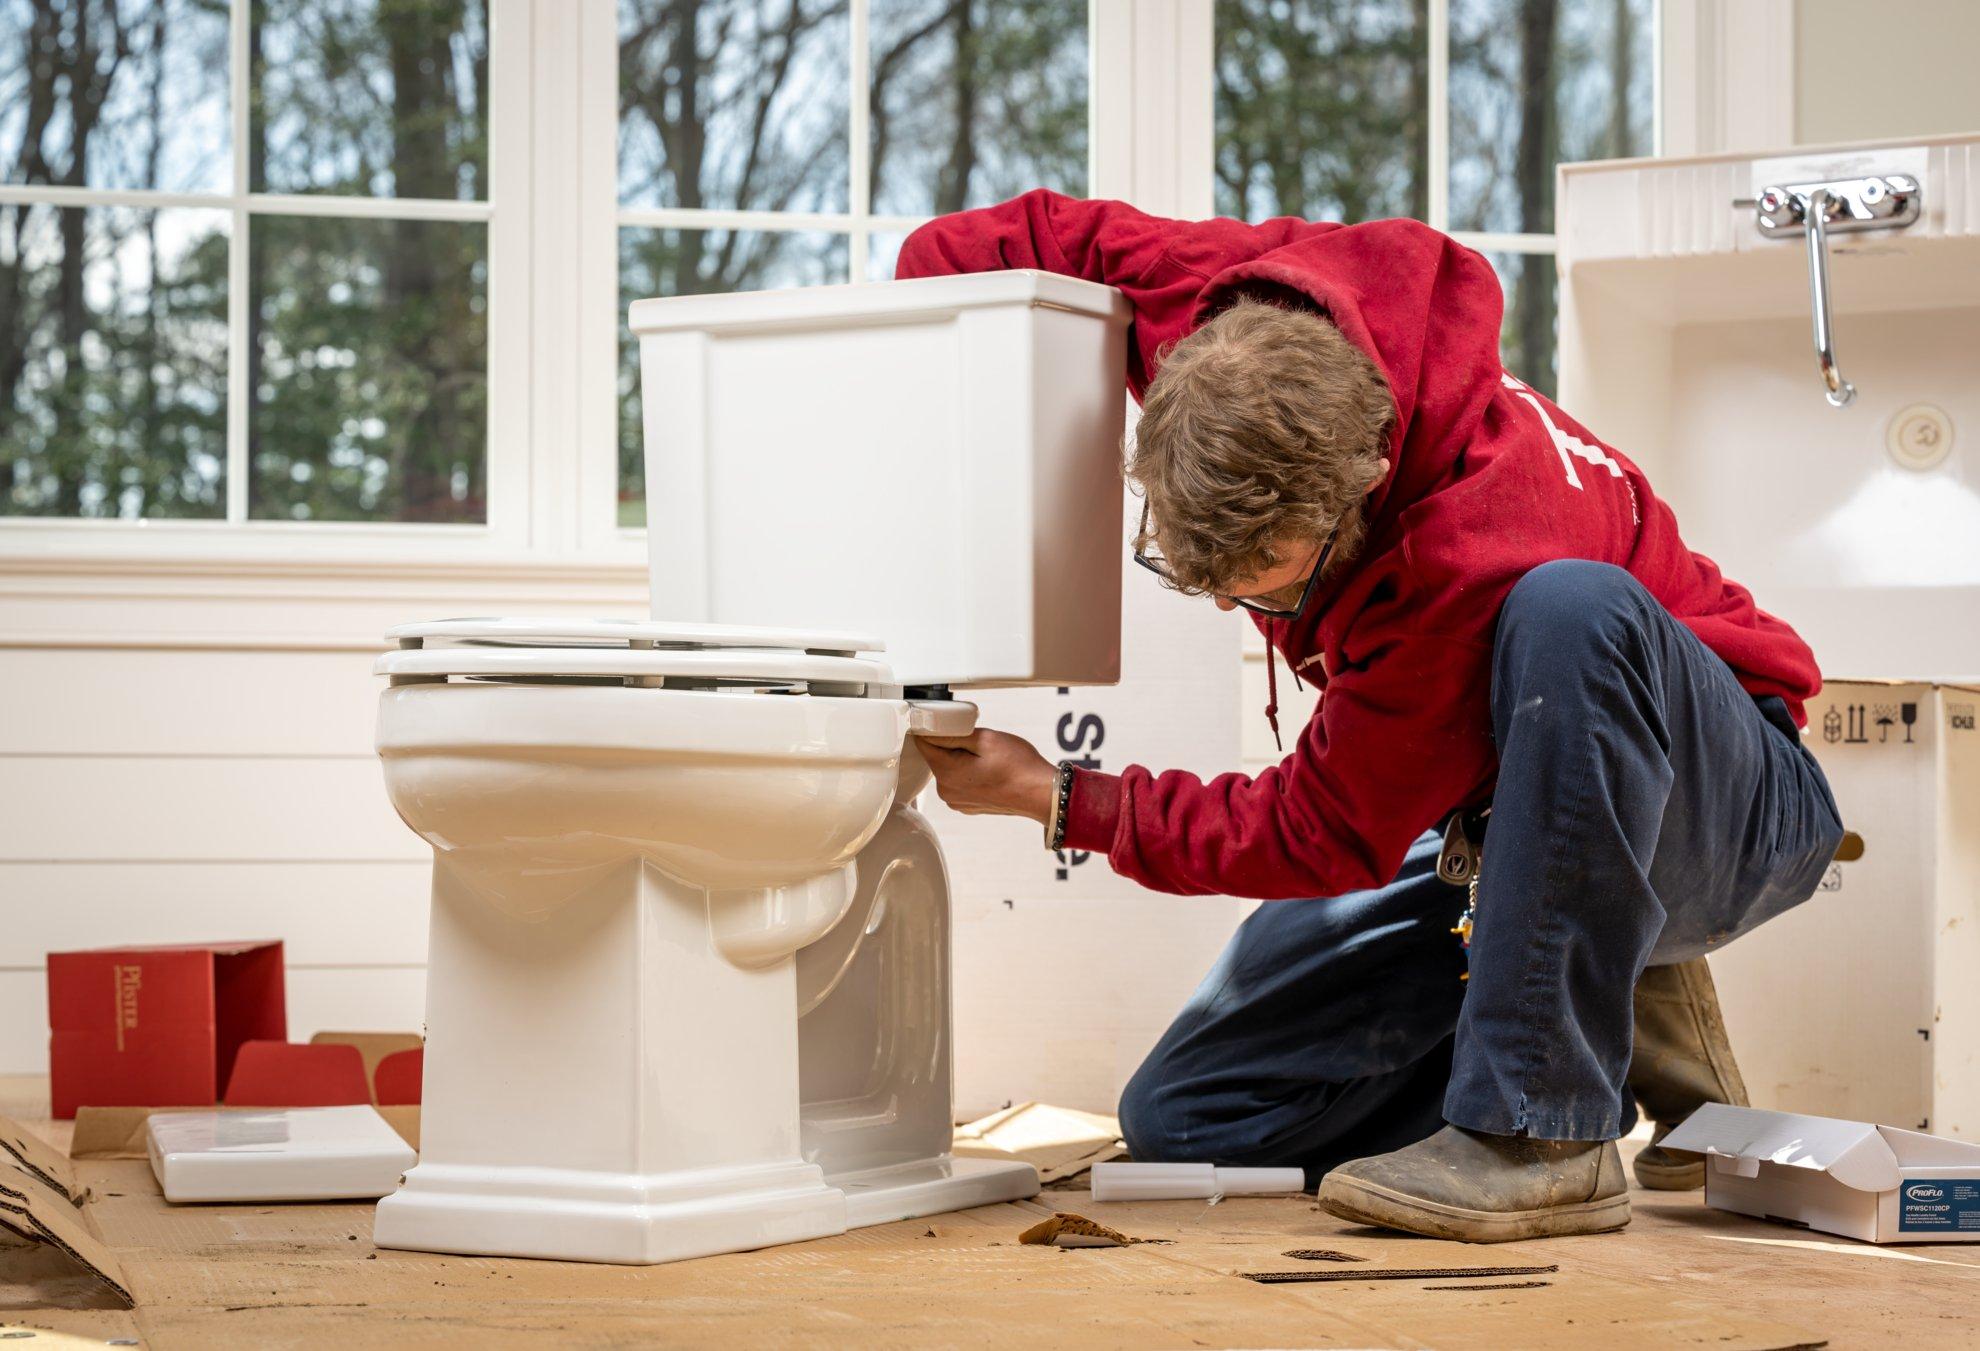 A contractor assembles a new toilet in a residential bathroom.